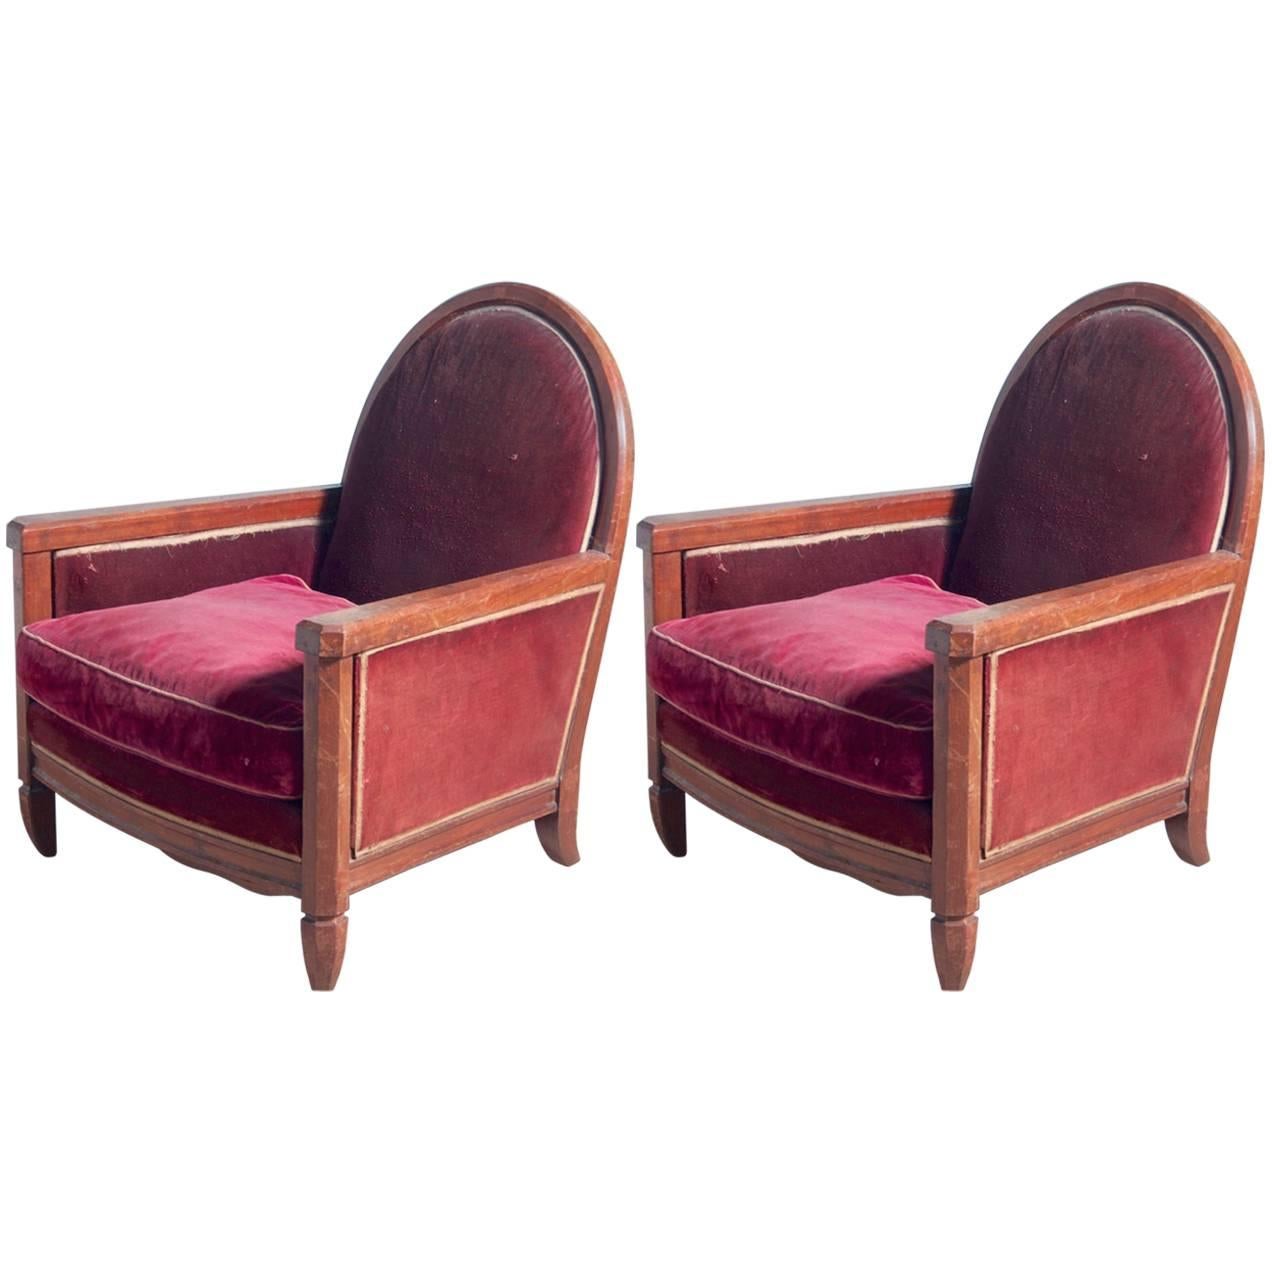 This pair is believed to be unique, commissioned for an installation in Paris, circa 1920.

Please note these chairs are unrestored in the first photograph. The second and third photos show the now-restored frames and the chairs in situ in